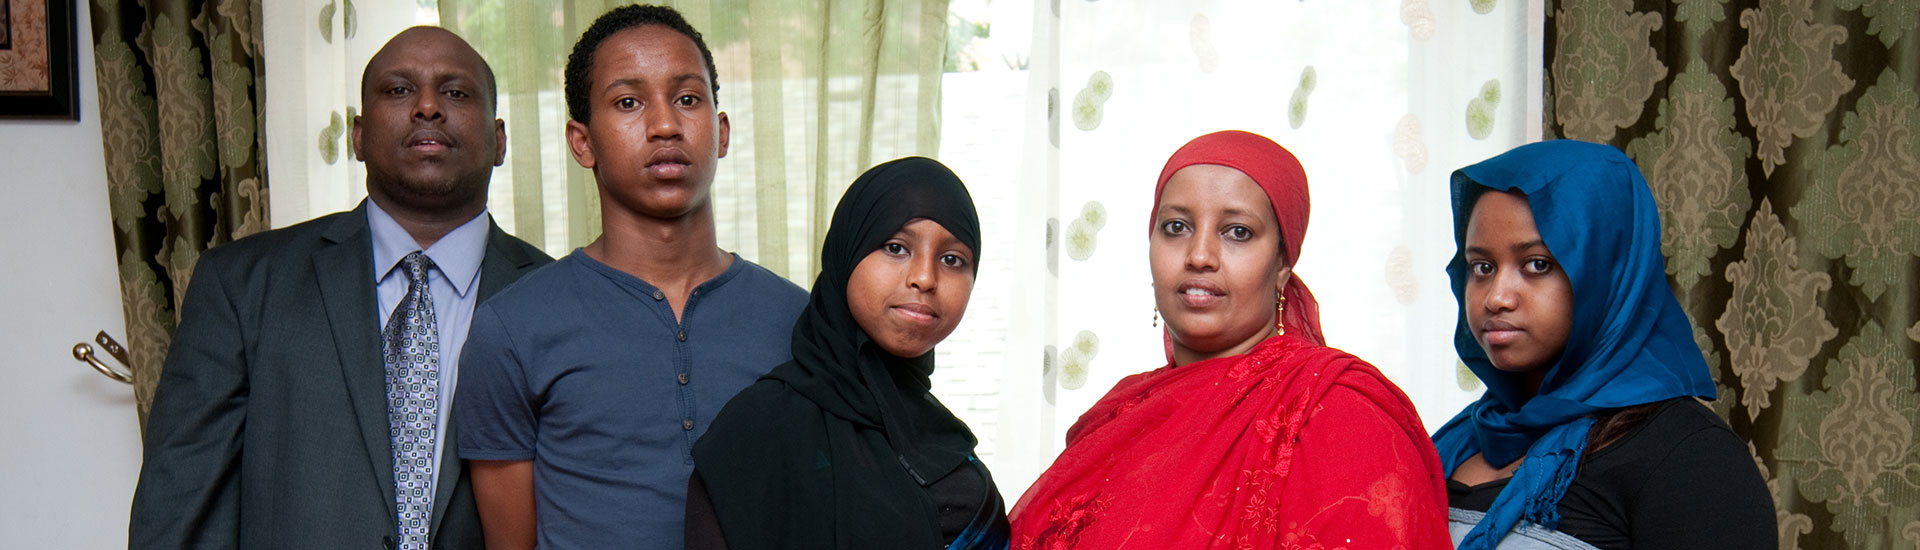 Family photo of a mother, father, and their three teenage children, who received asylum from Somalia with representation from NIJC.